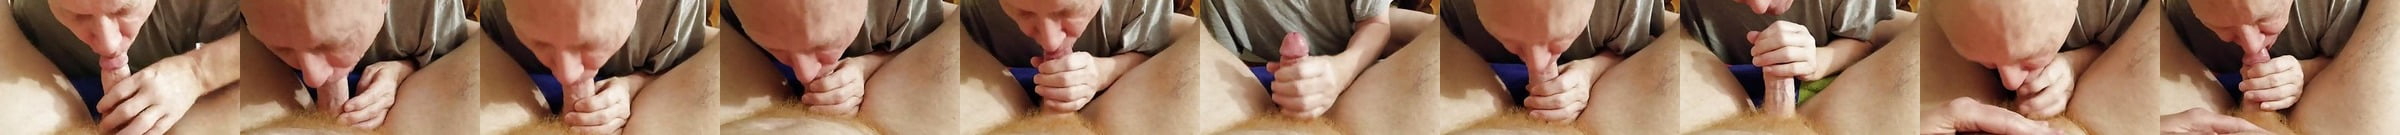 Wanking And Oral Free Gay Hd Porn Video 25 Xhamster Fr